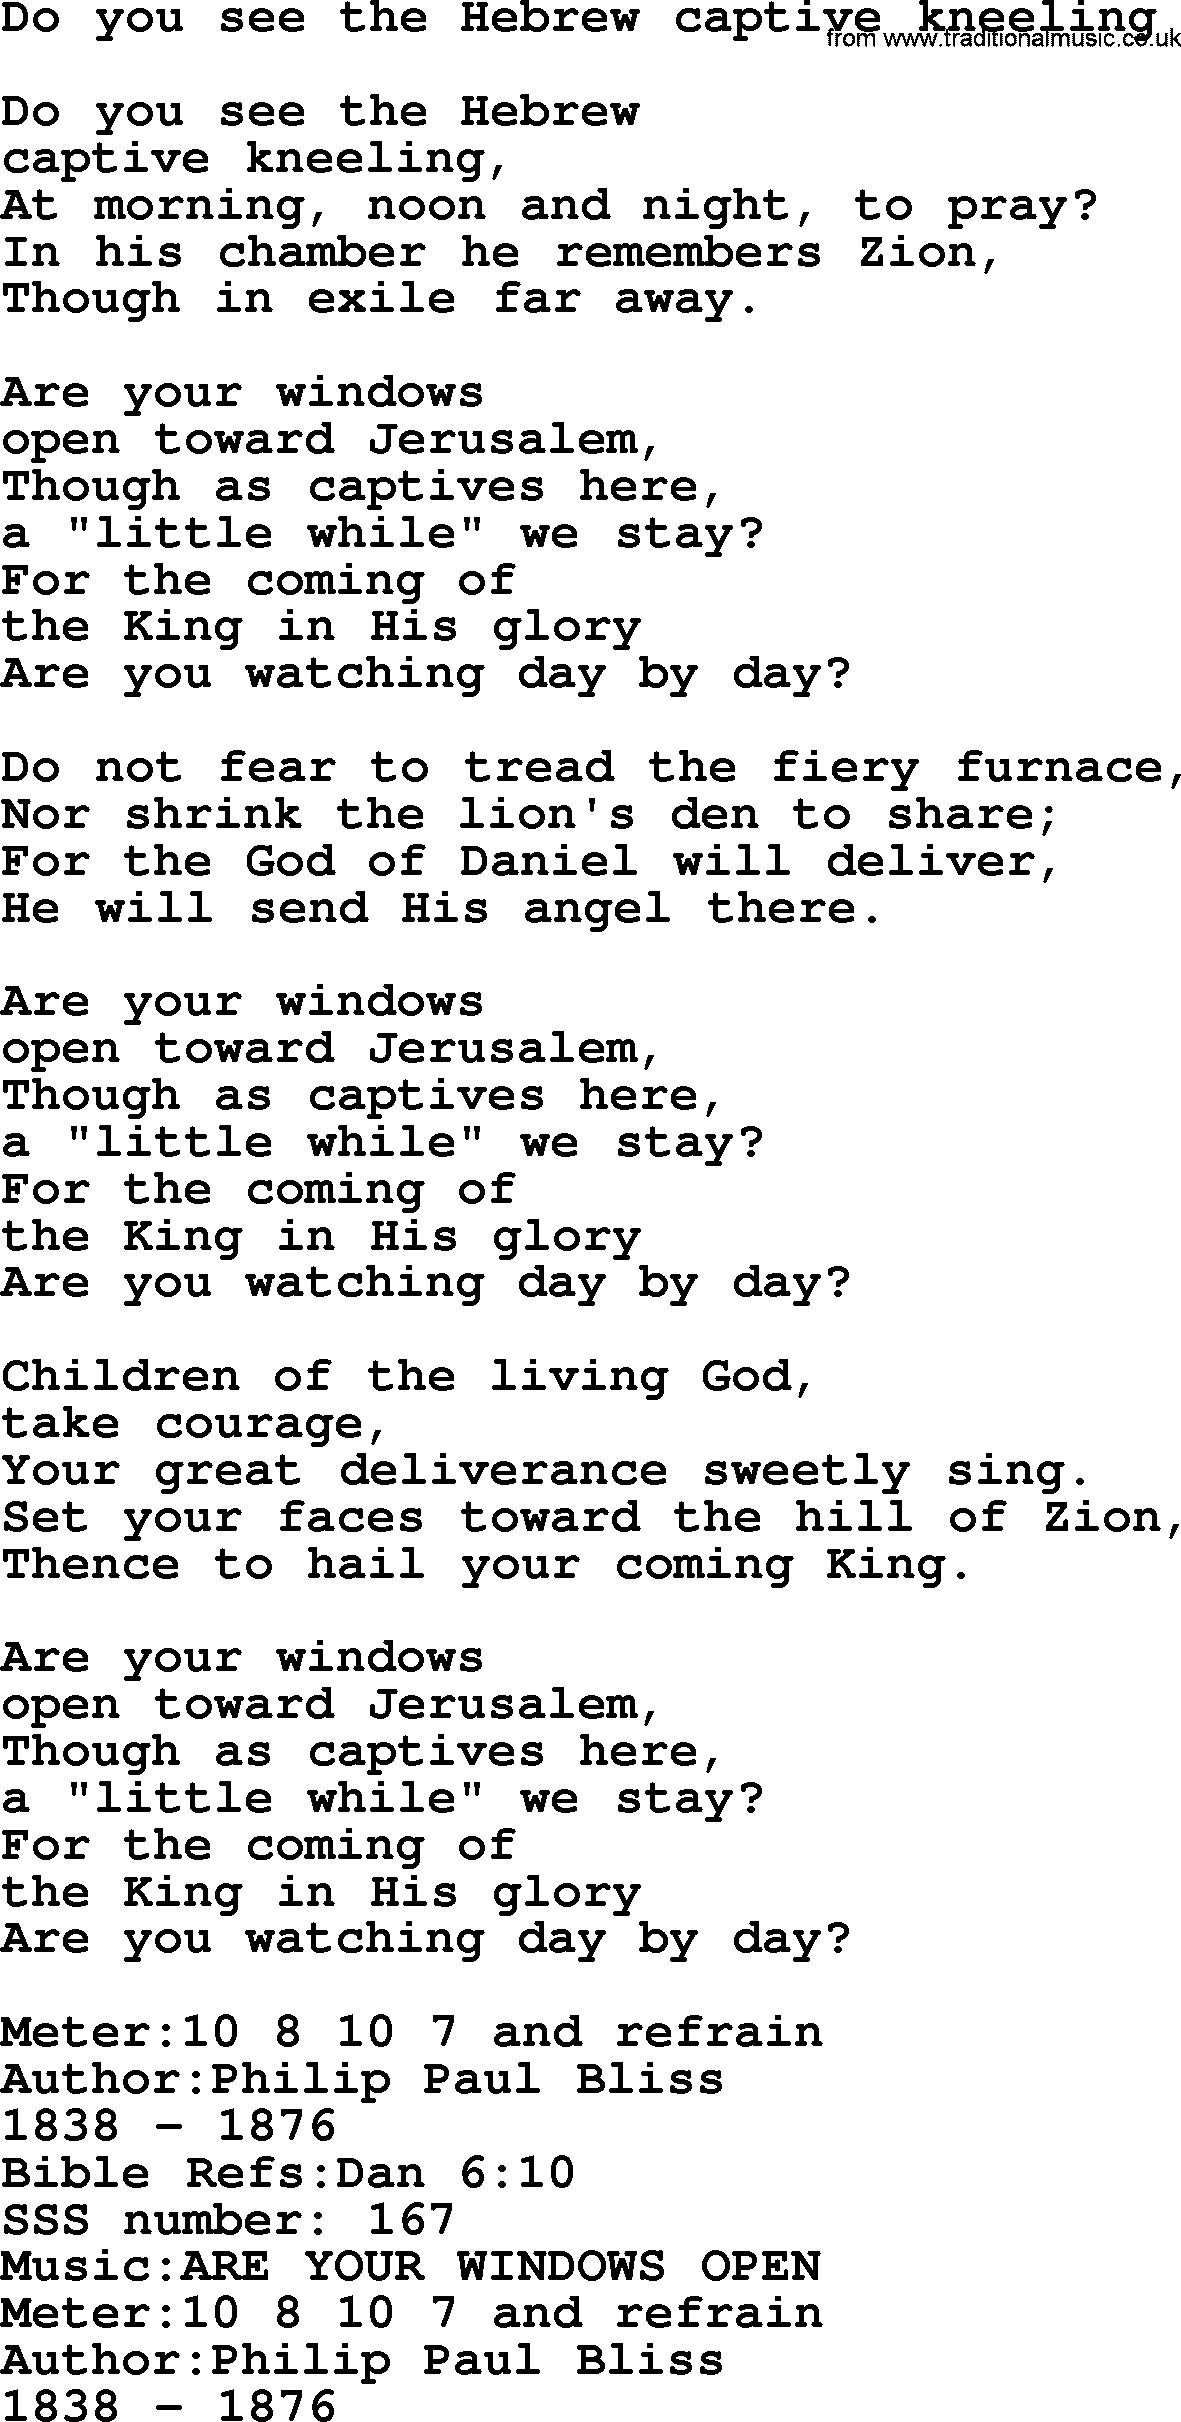 Sacred Songs and Solos complete, 1200 Hymns, title: Do You See The Hebrew Captive Kneeling, lyrics and PDF